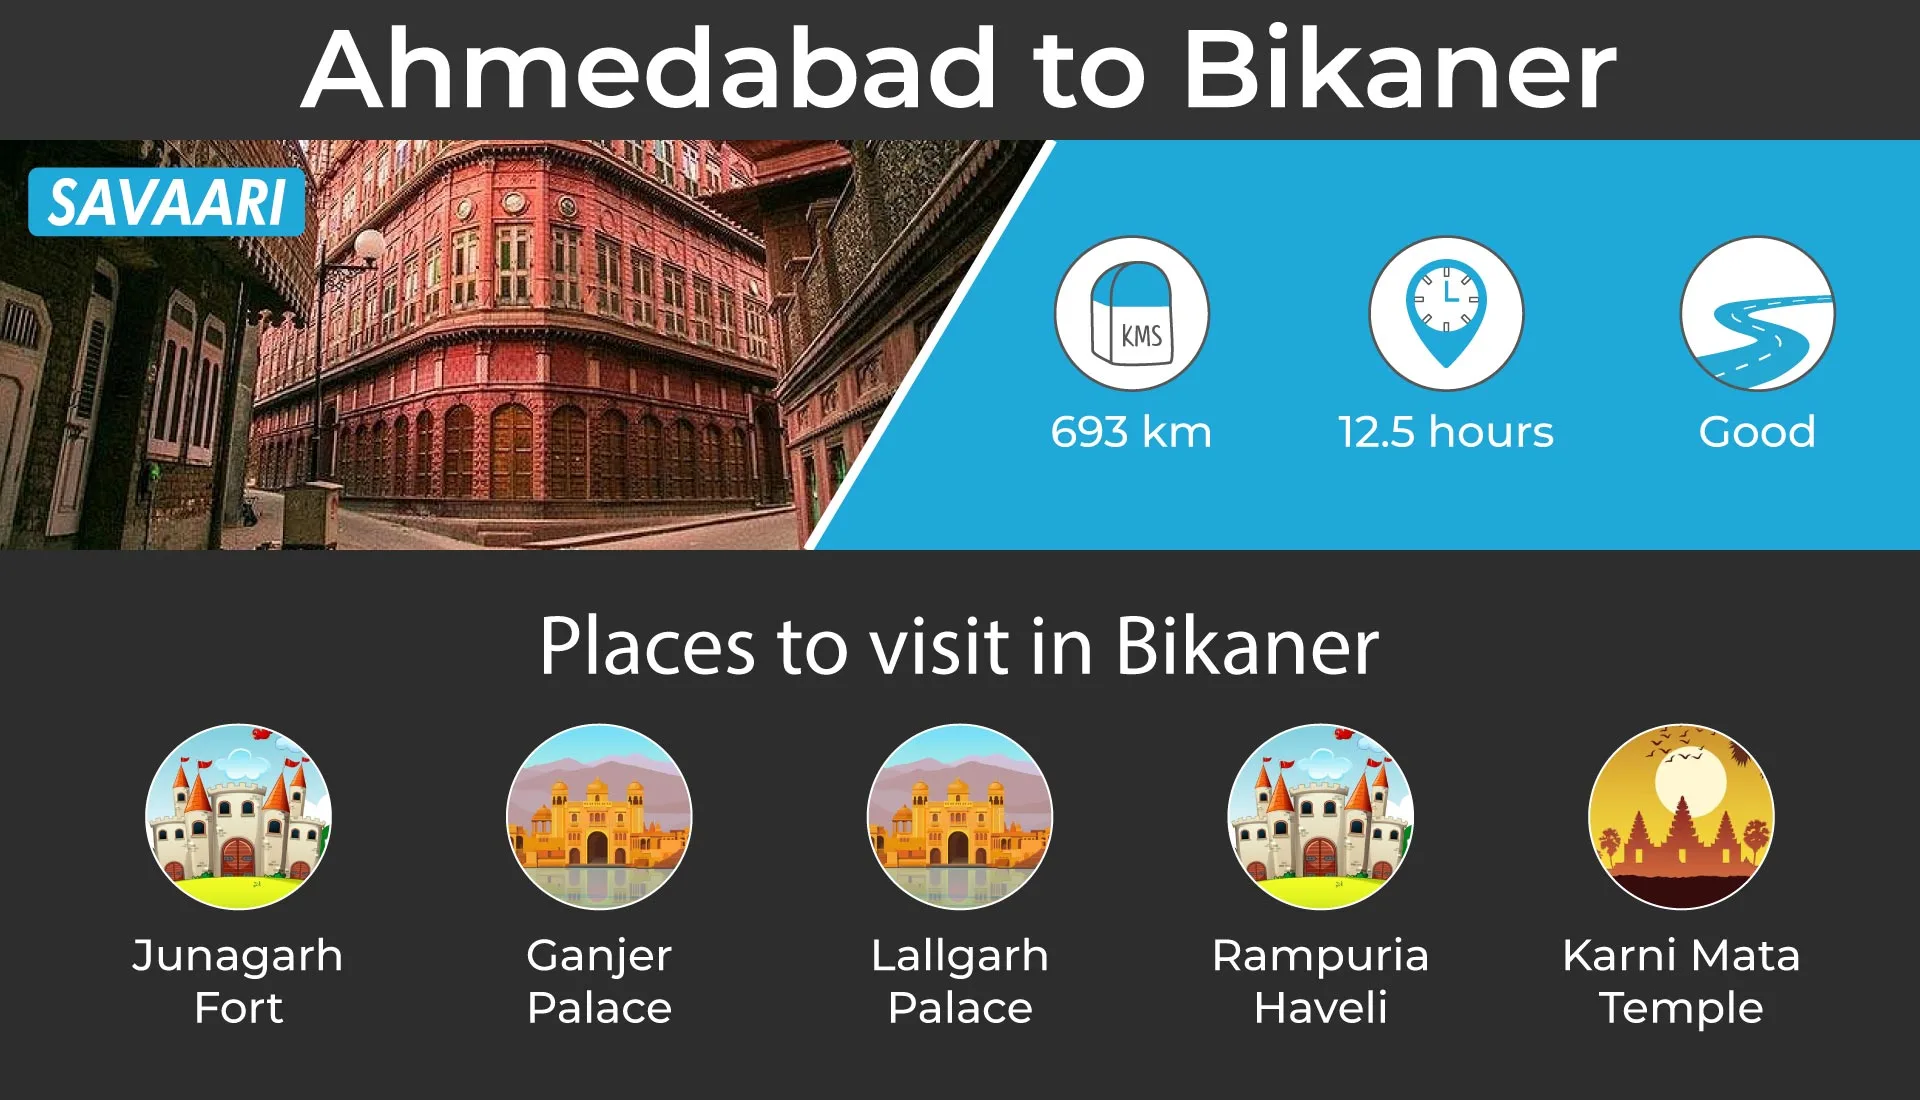 Place to visit near Ahmedabad, Food lover's paradise - trip to Bikaner